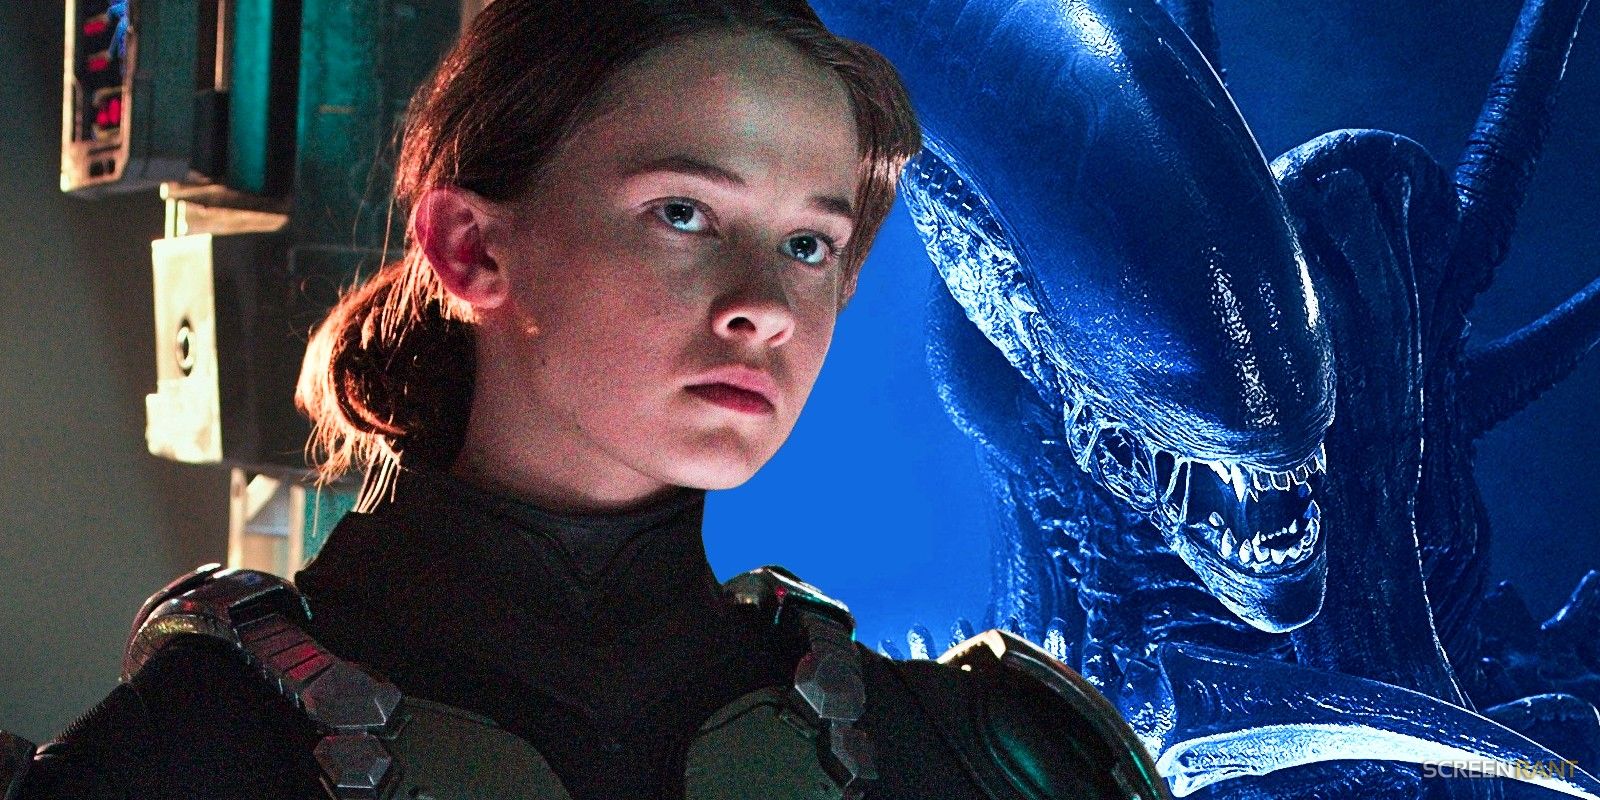 Alien: Romulus star Cailee Spaeny in Pacific Rim Uprising and a Xenomorph from Alien: Covenant